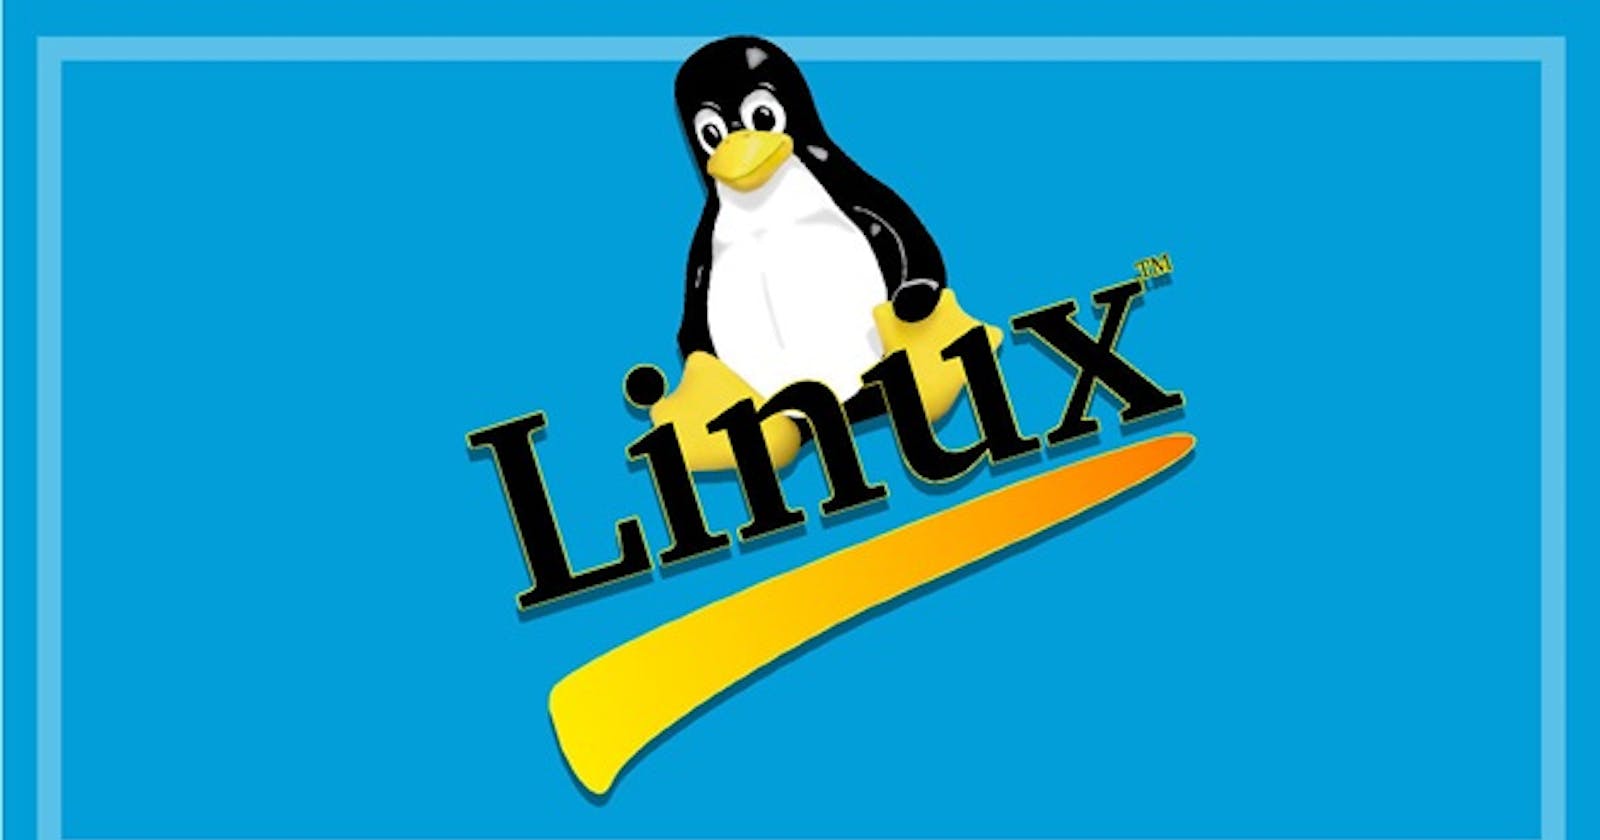 Day 3 - Basic Linux commands